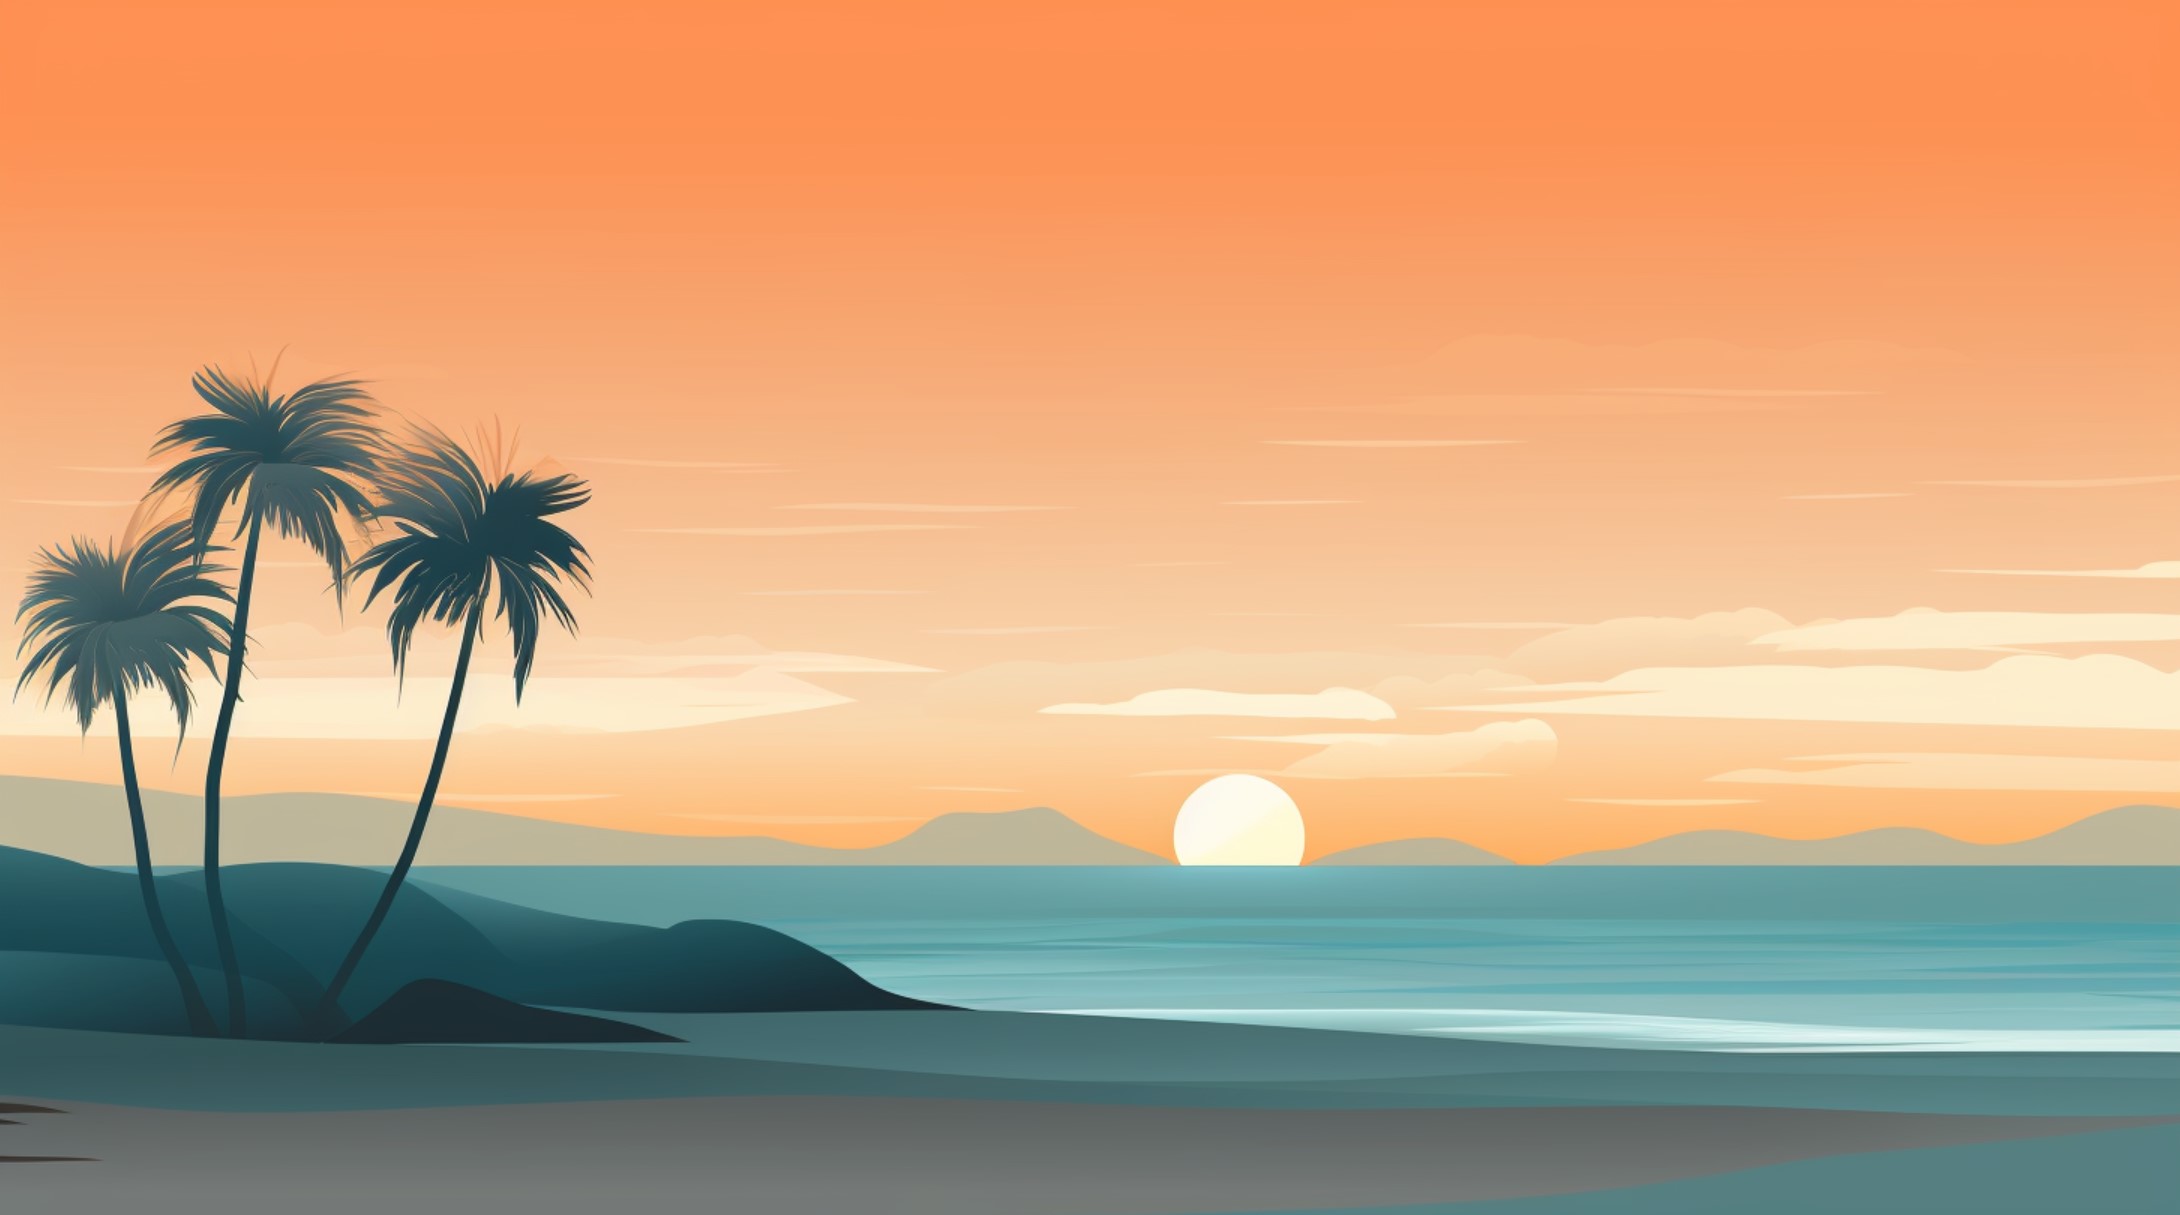 beach with palm trees and a sunset